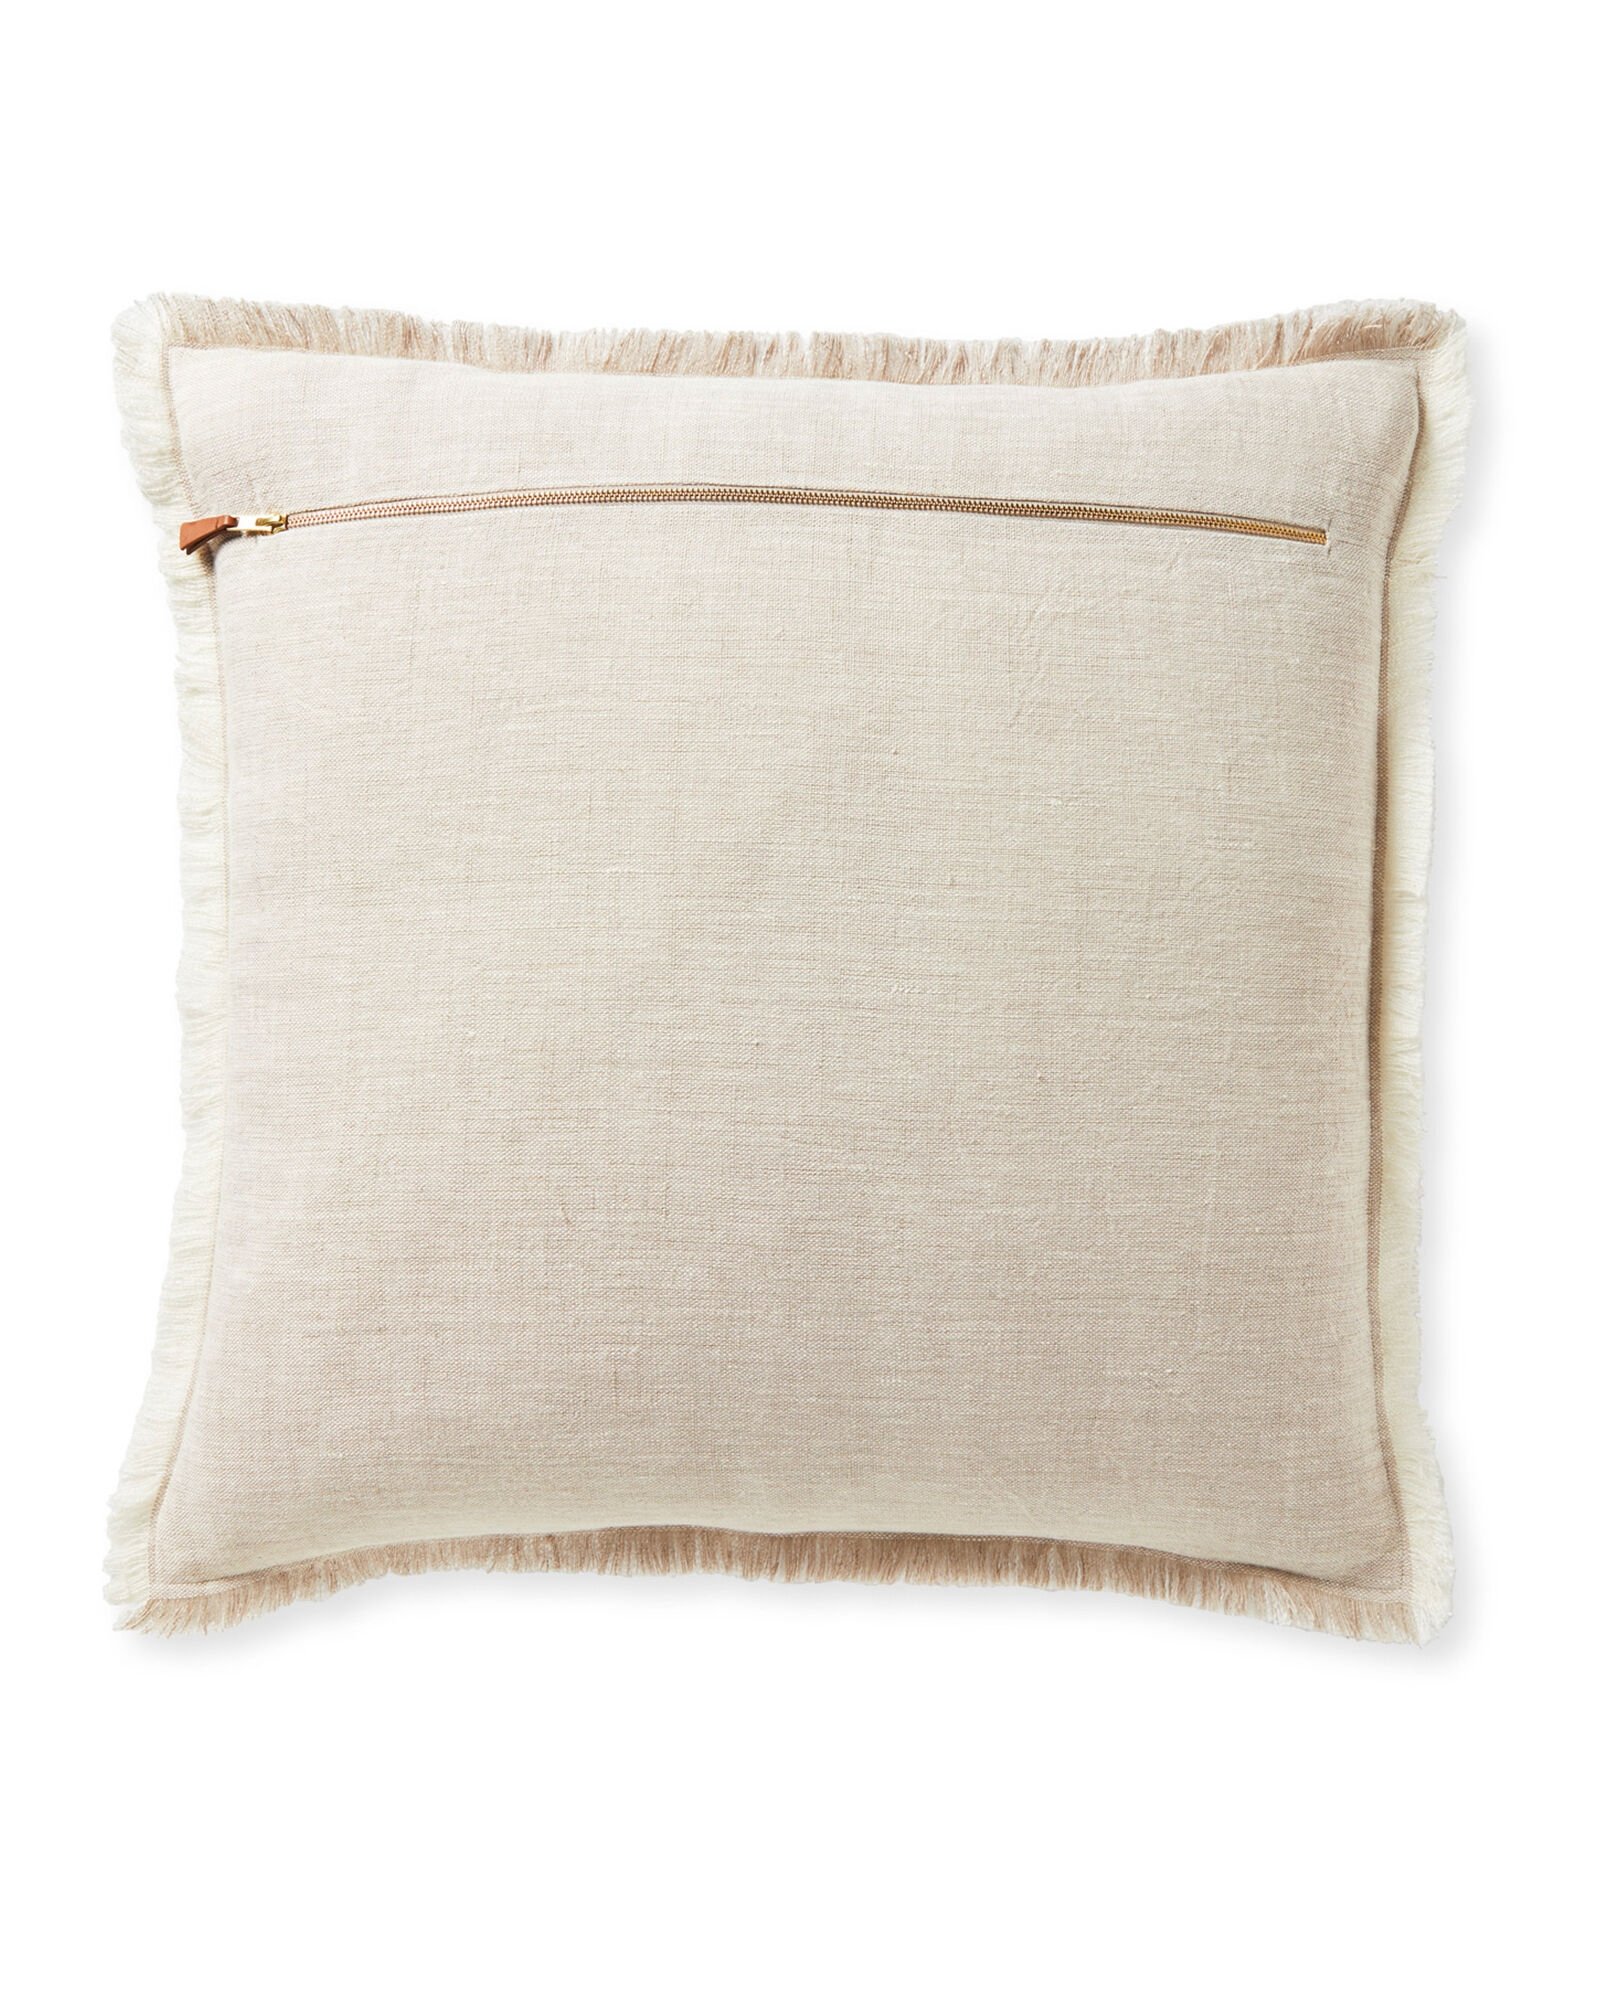 Avalis Pillow Cover, Sand, 24" x 24" - Image 1